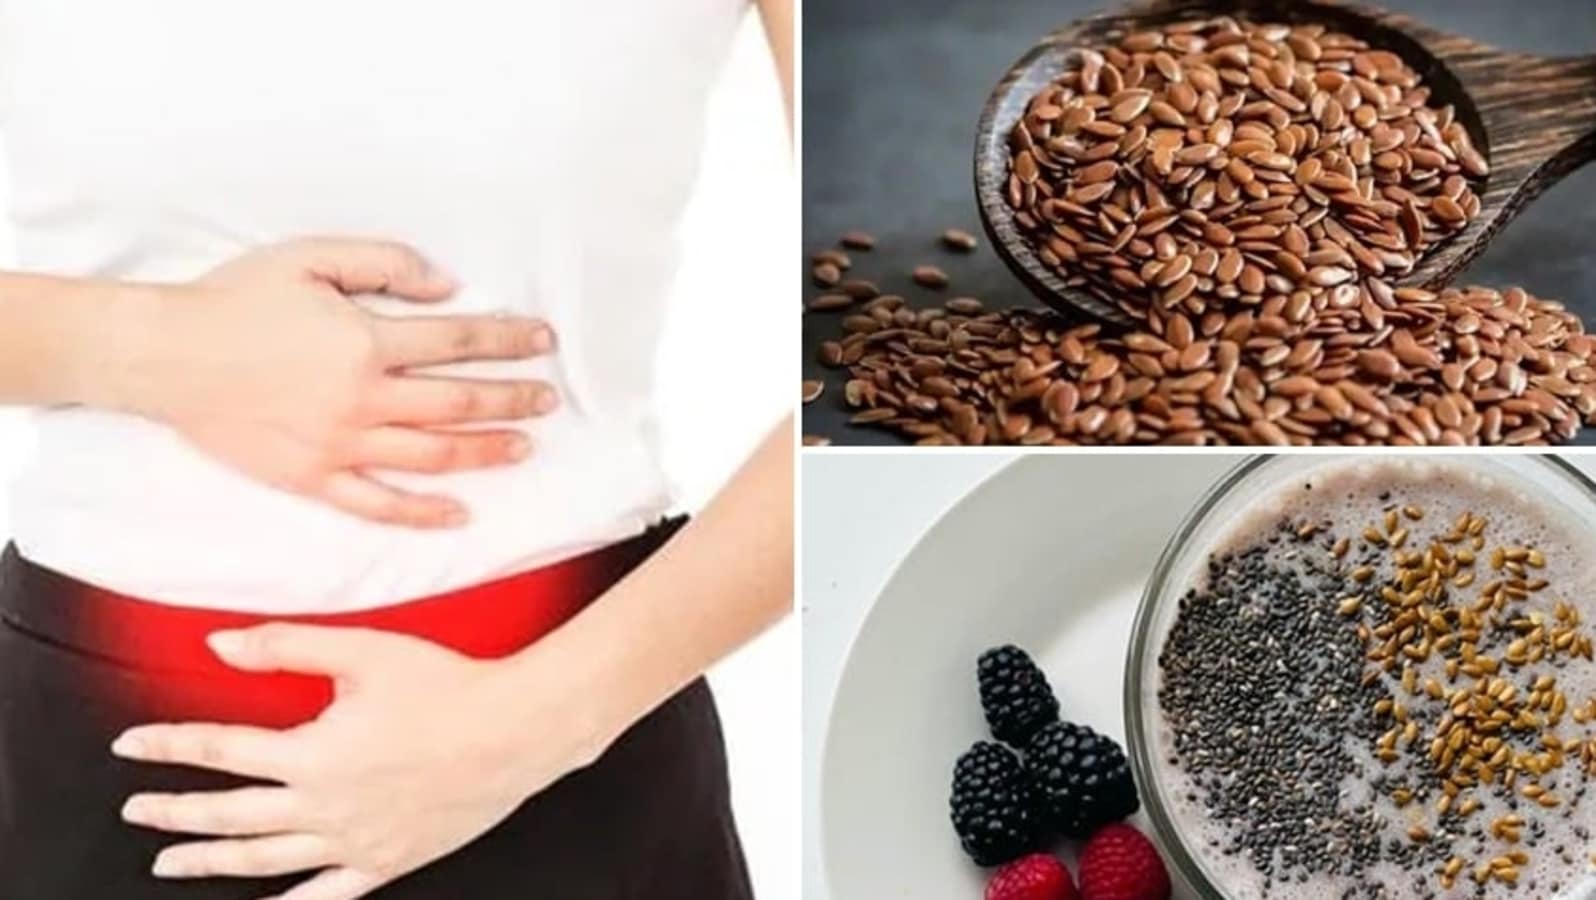 Flaxseeds Health Benefits: 10 amazing health benefits of flaxseeds and how  to consume them